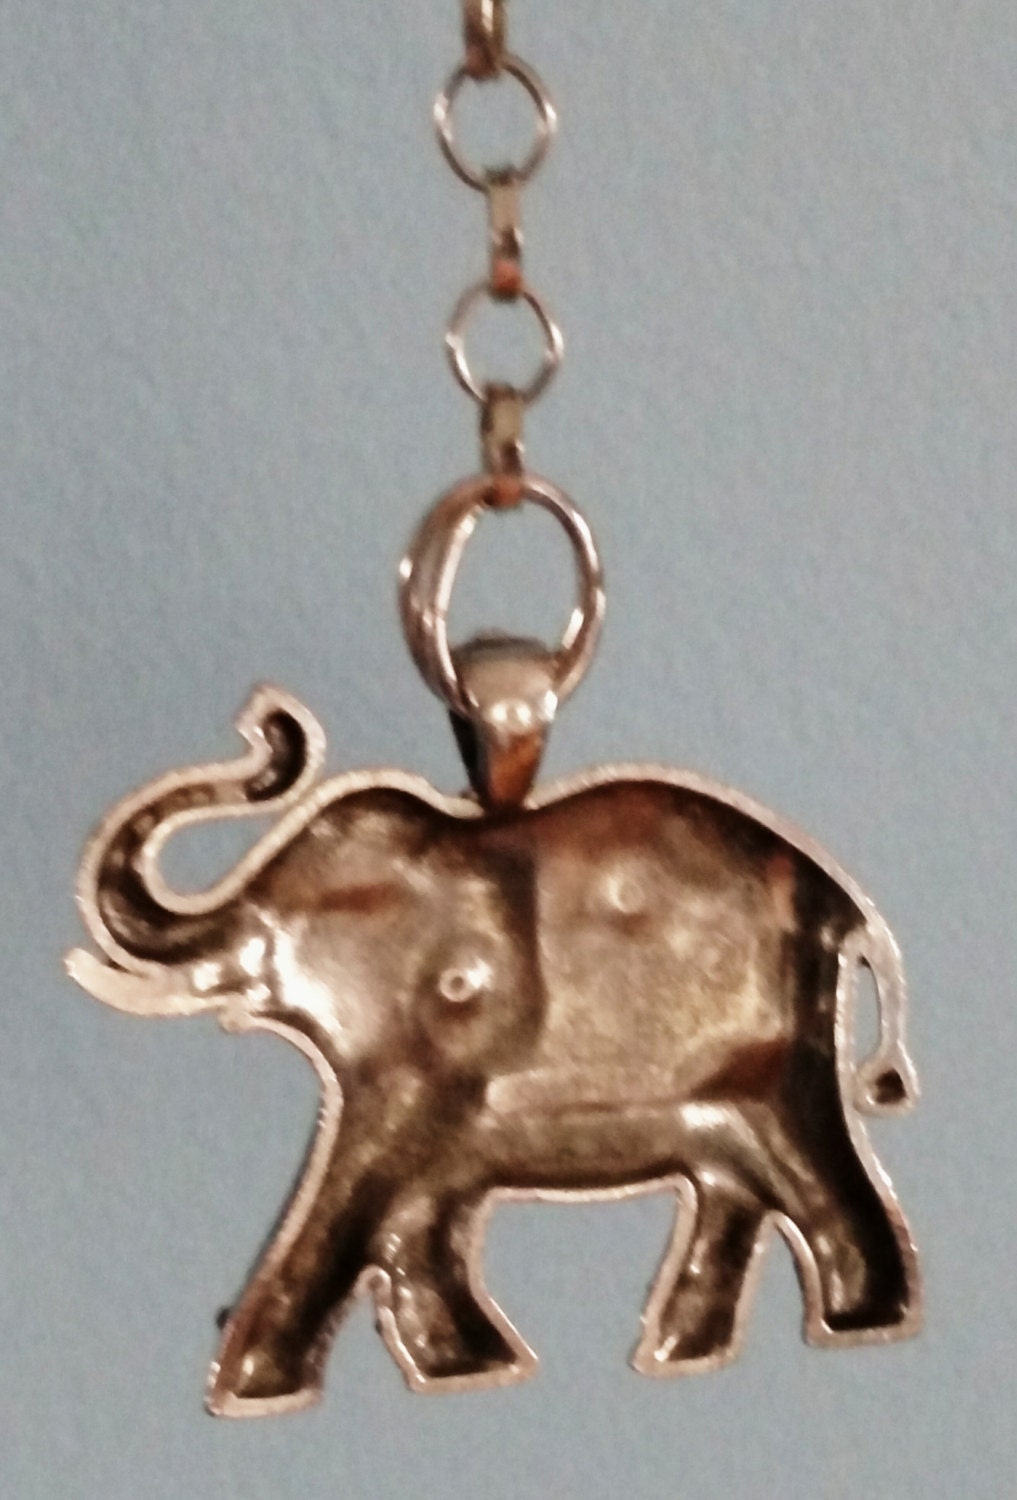 Elephant Ceiling Fan Pull Chain Home Decor Silver Link Chain